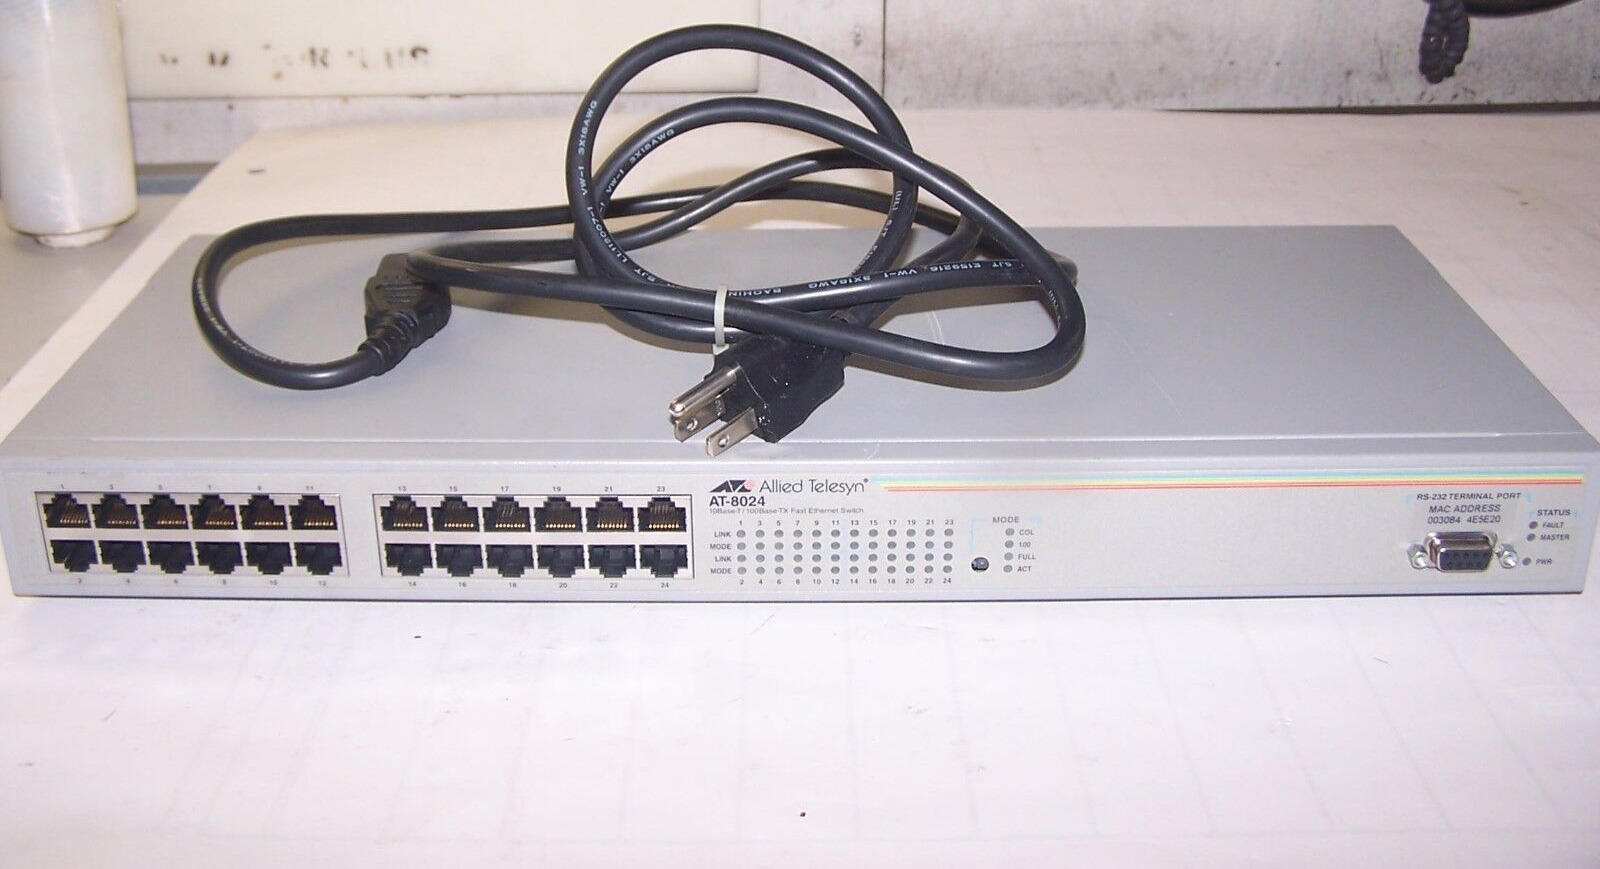 ALLIED TELESYN 24-PORT 10BASE-T / 100BASE-TX FAST ETHERNET SWITCH AT-8024